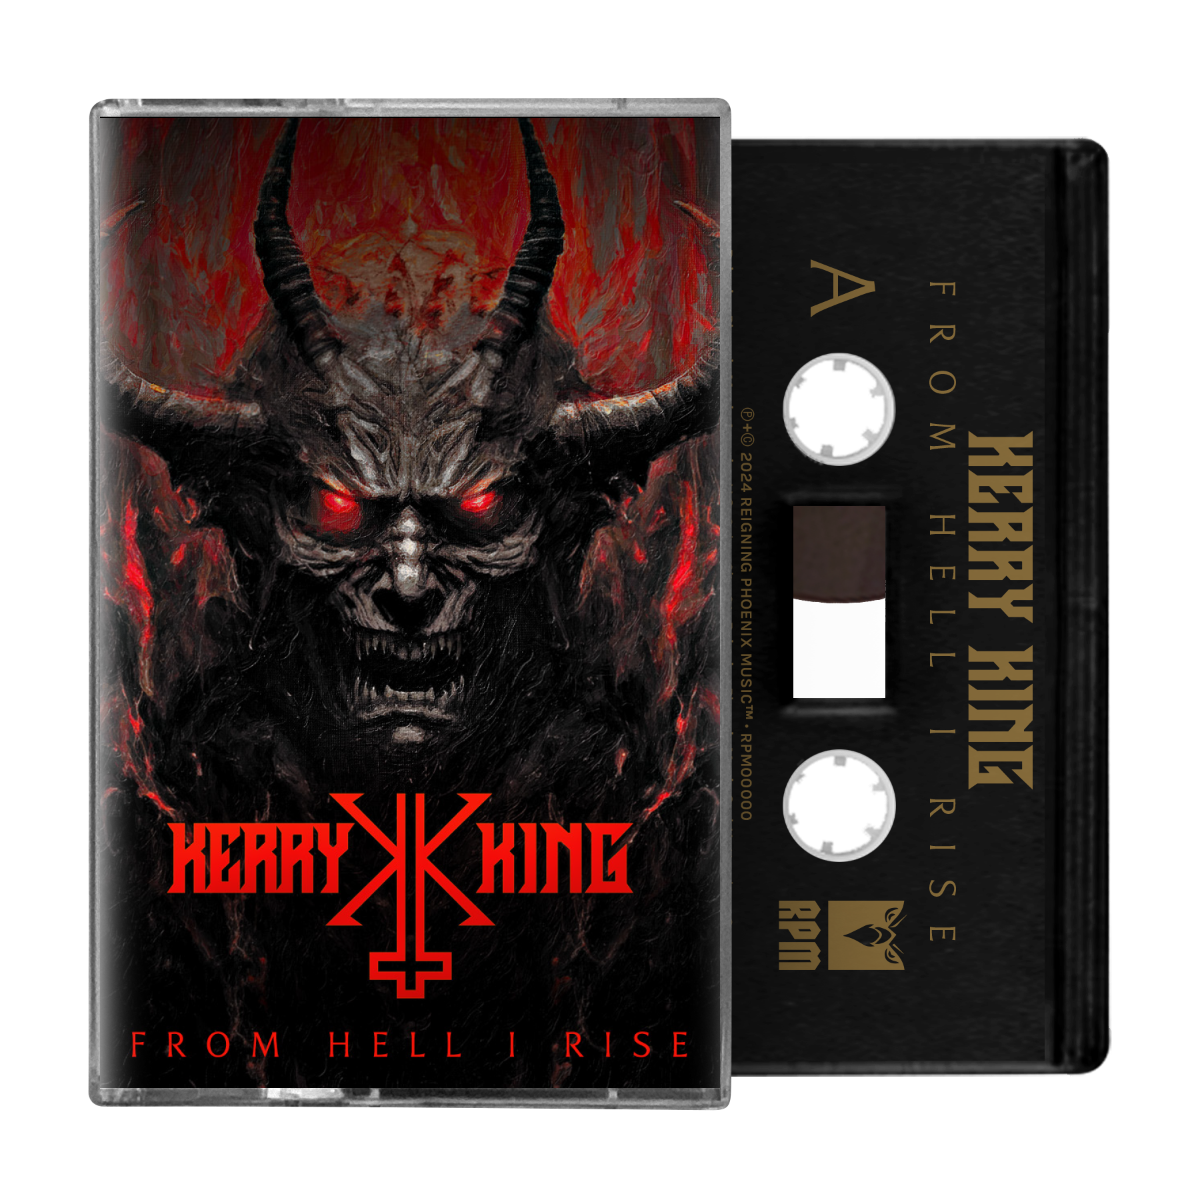 Kerry King | From Hell I Rise (Colored Cassette, Black) | Cassette